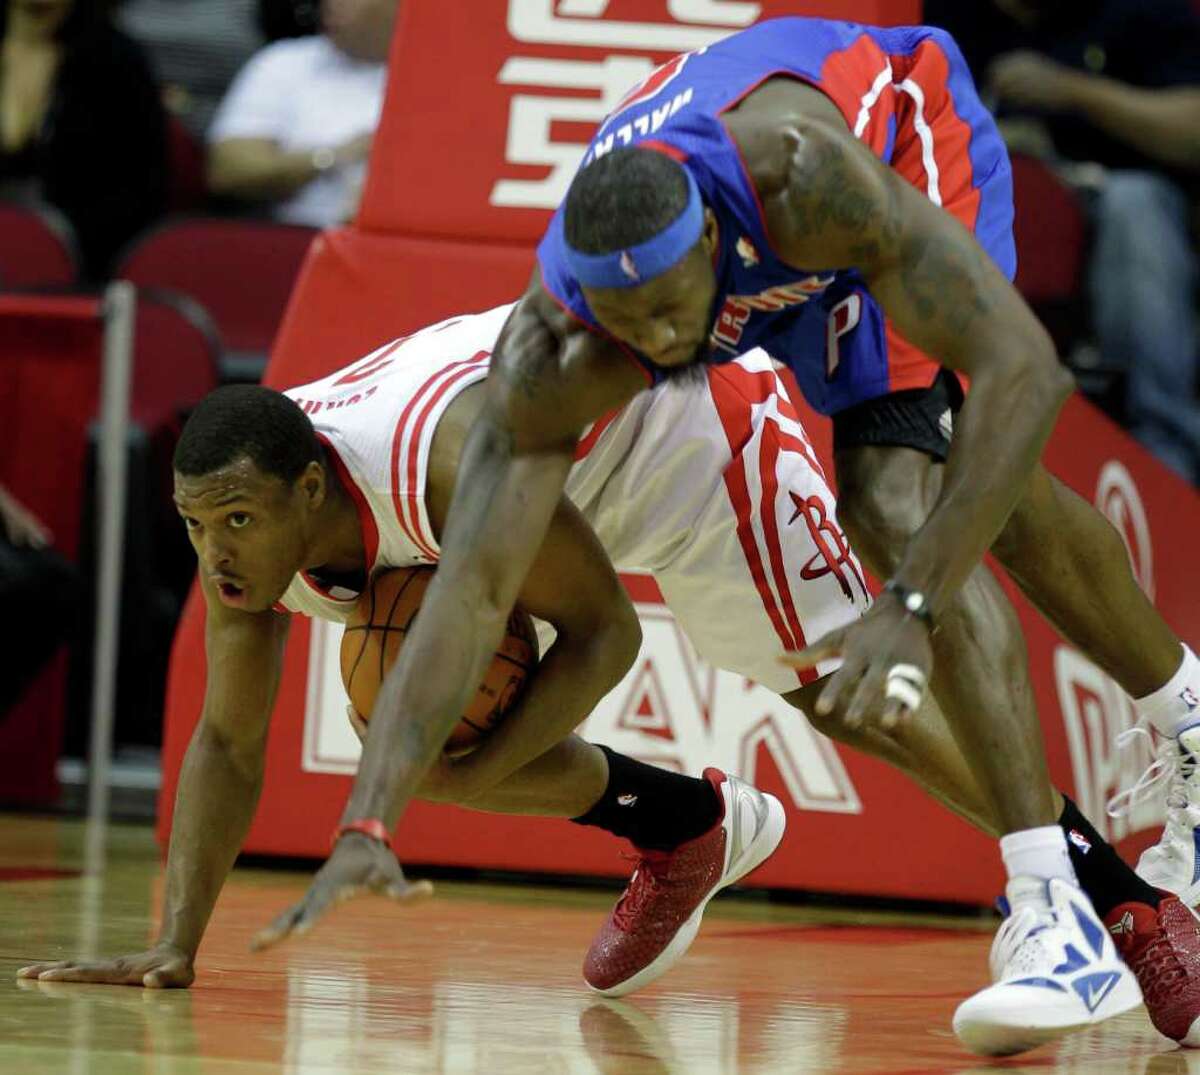 Houston Rockets' Kyle Lowry, left, and Detroit Pistons' Ben Wallace, right, tangle for the ball during NBA game at Toyota Center Tuesday, Jan. 17, 2012, in Houston.